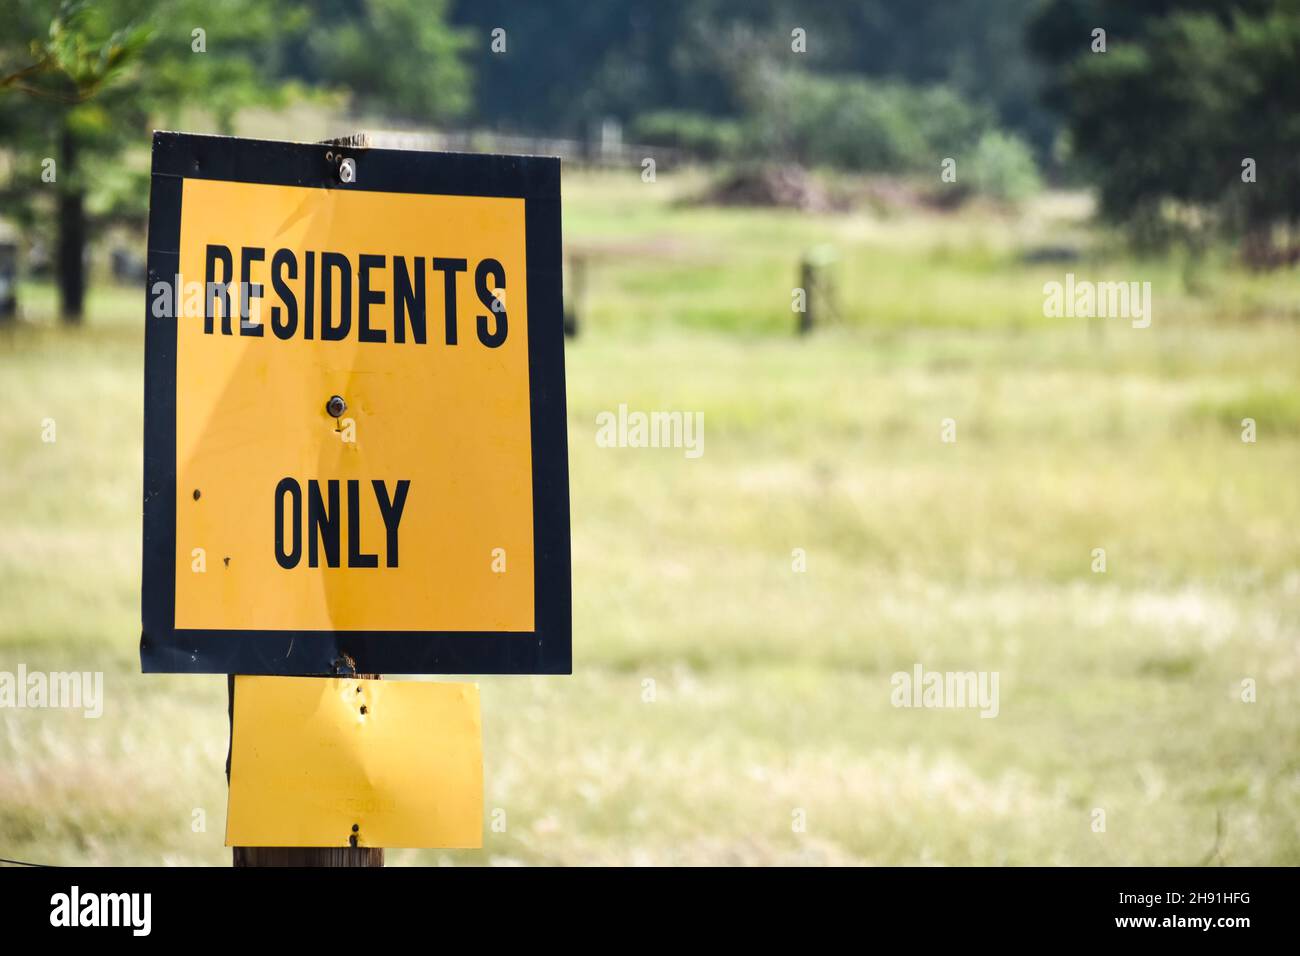 A bright yellow sign saying residents only with a black thick border against the backdrop of a meadow restricting access to third parties to the area Stock Photo